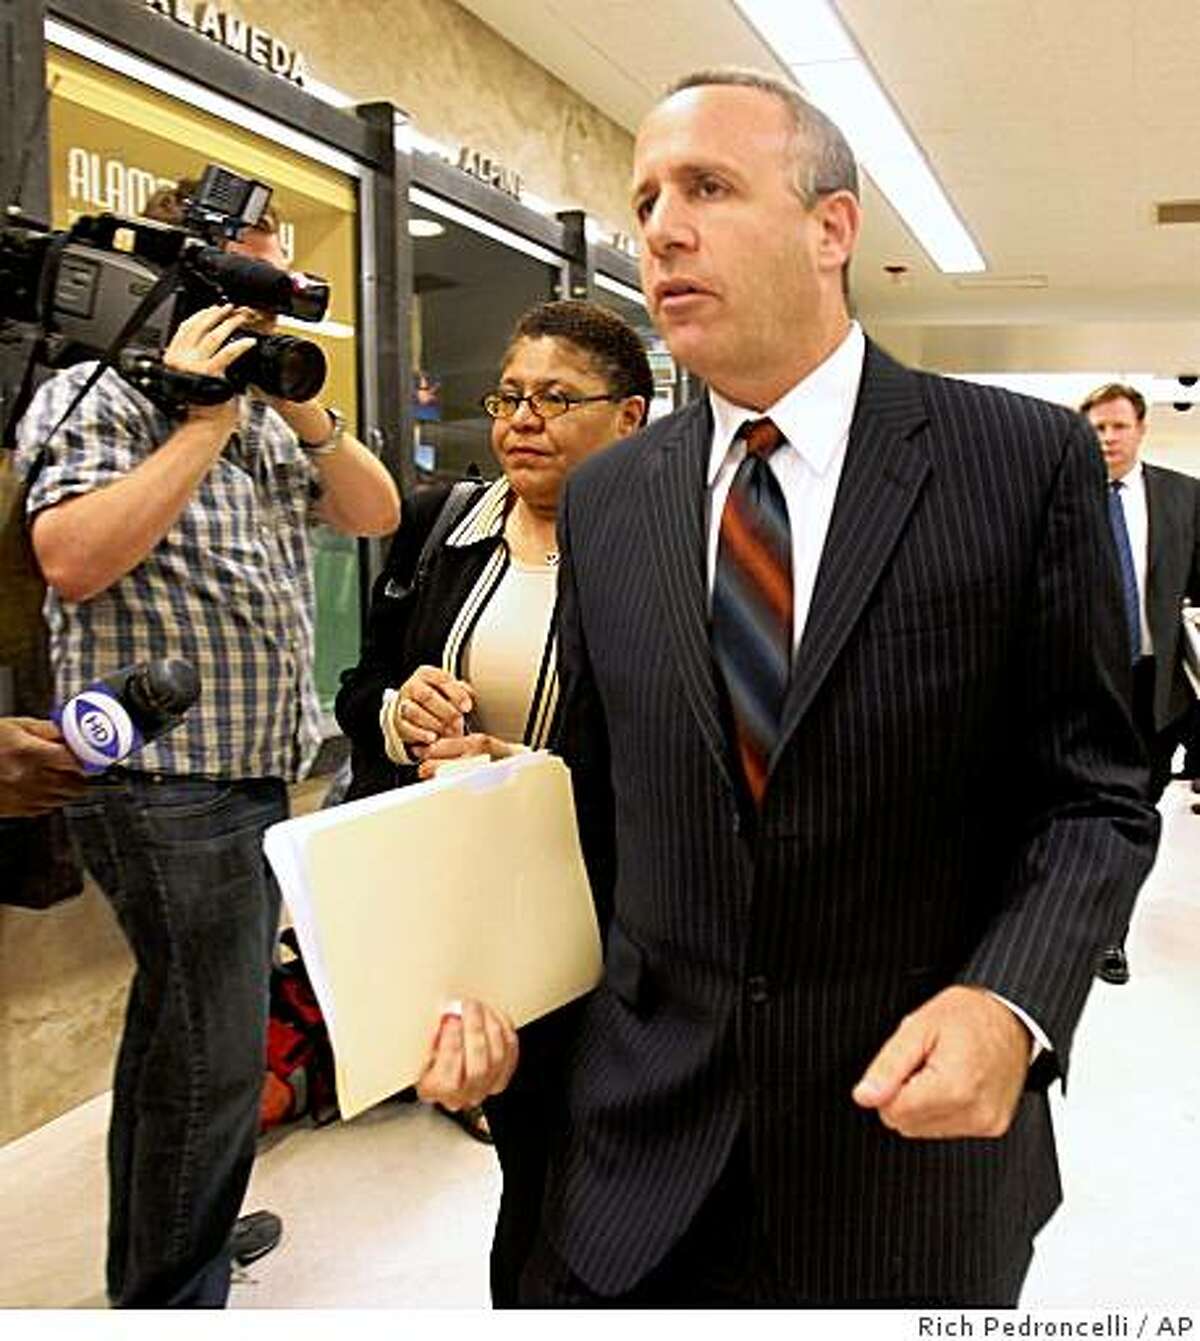 State Senate President Pro Tem Darrell Steinberg, D-Sacramento, right, and Assembly Speaker Karen Bass, D-Los Angeles, walk past reporters as they go to a meeting with Gov. Arnold Schwarzenegger at the Capitol in Sacramento, Calif., Sunday, June 28, 2009. The Democratic legislative leaders met with the governor to try to find a solution to the state's pending cash crisis.(AP Photo/Rich Pedroncelli)